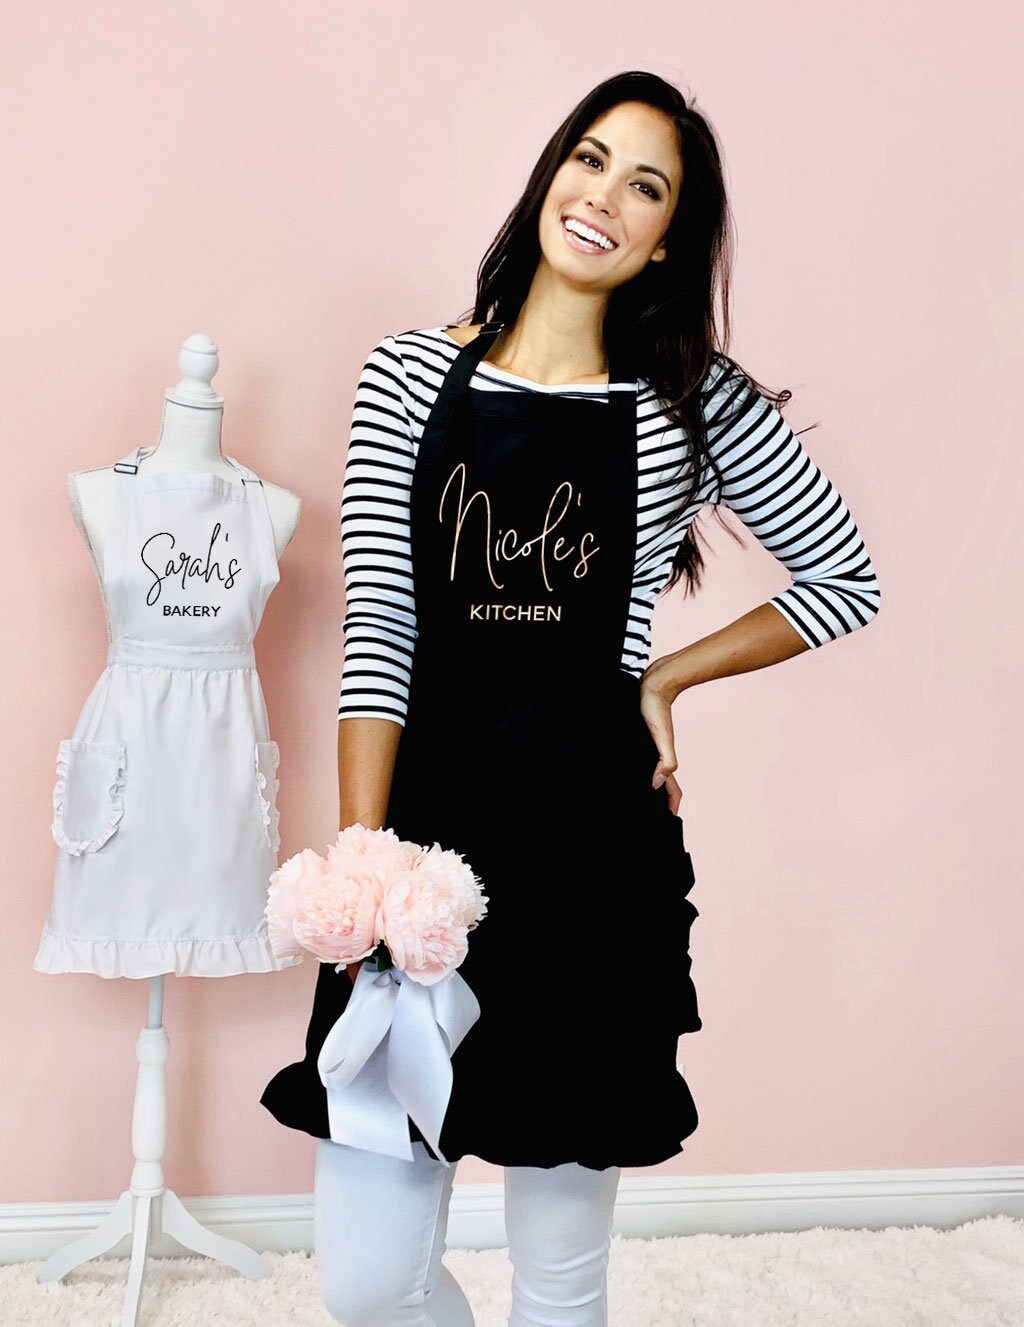 Details about   Novelty Cotton Ruffle Apron Can be Personalized